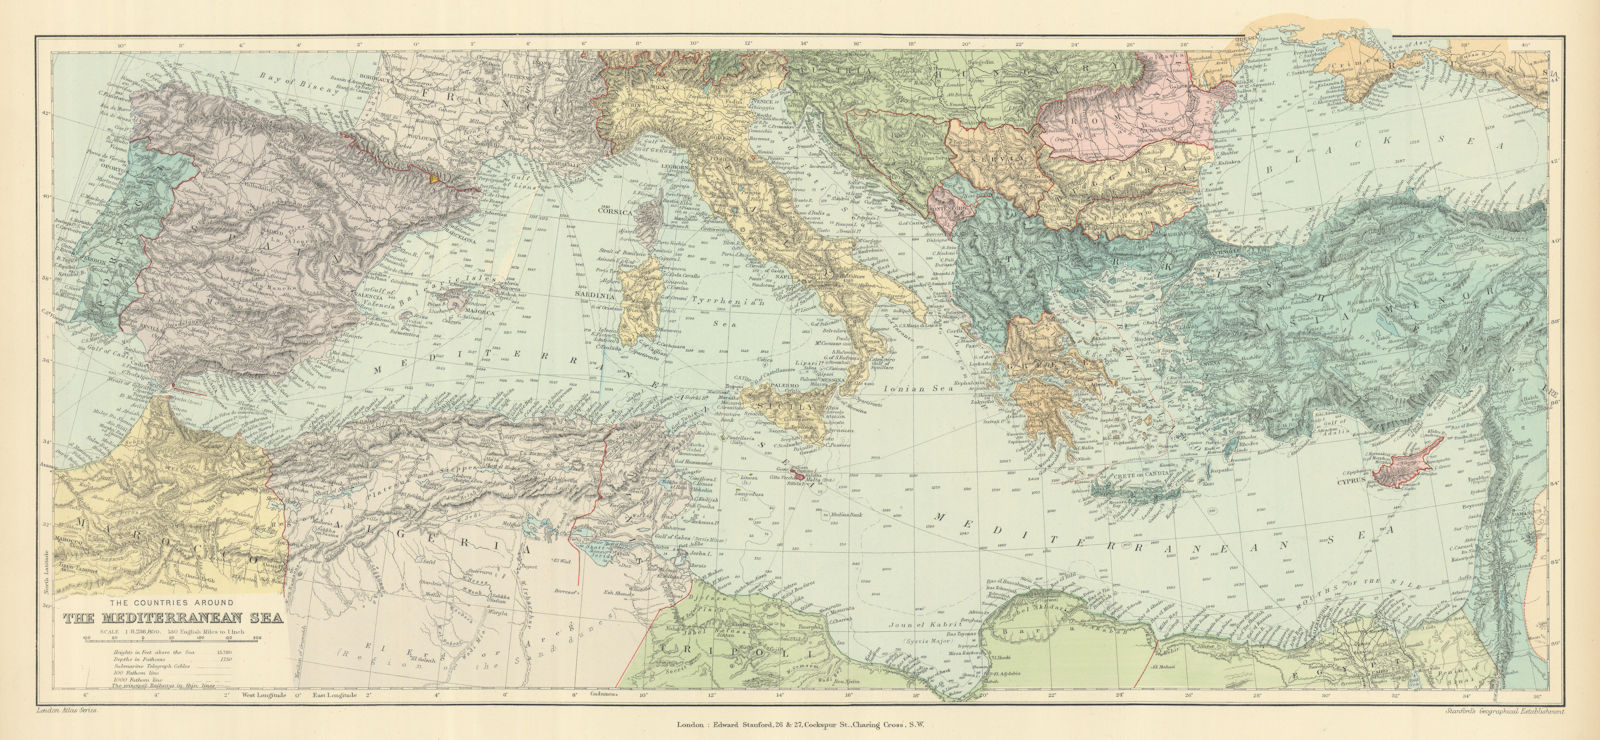 Countries round the Mediterranean. Soundings Telegraph cables. STANFORD 1894 map